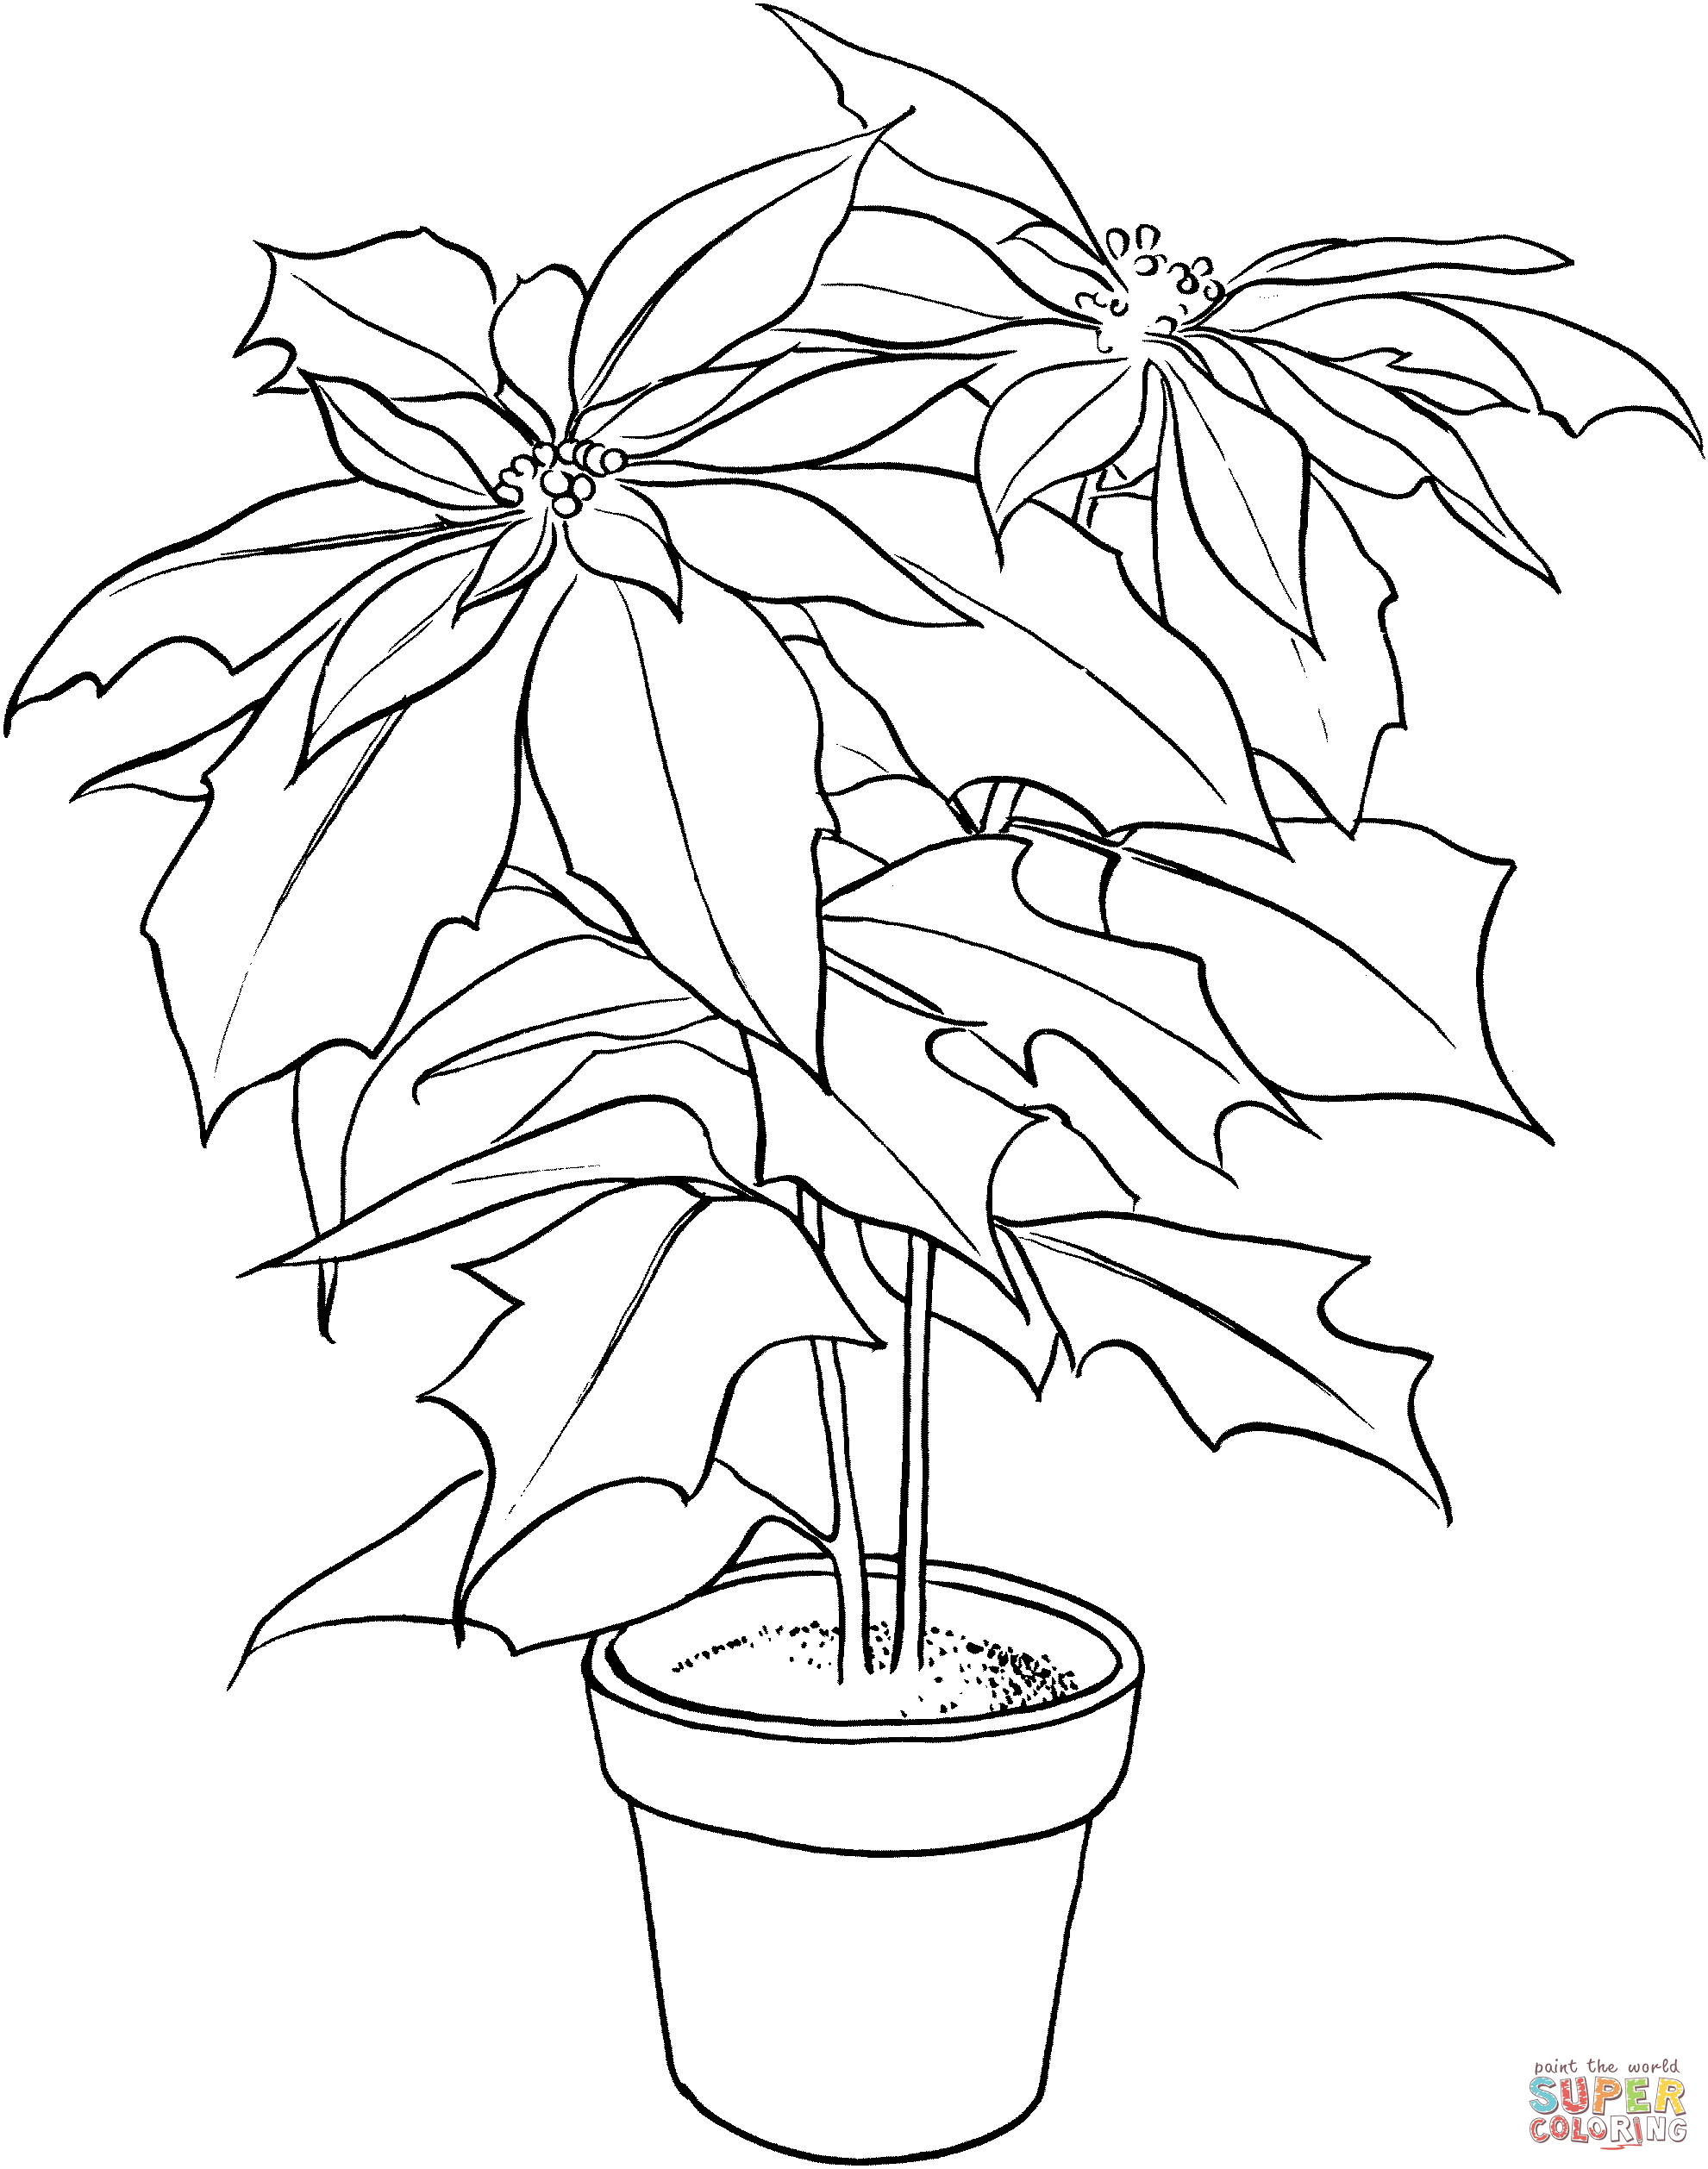 Poinsettia o Christmas Flower Coloring Pages - Poinsettia Coloring Pages -  Páginas para colorear para niños y adultos